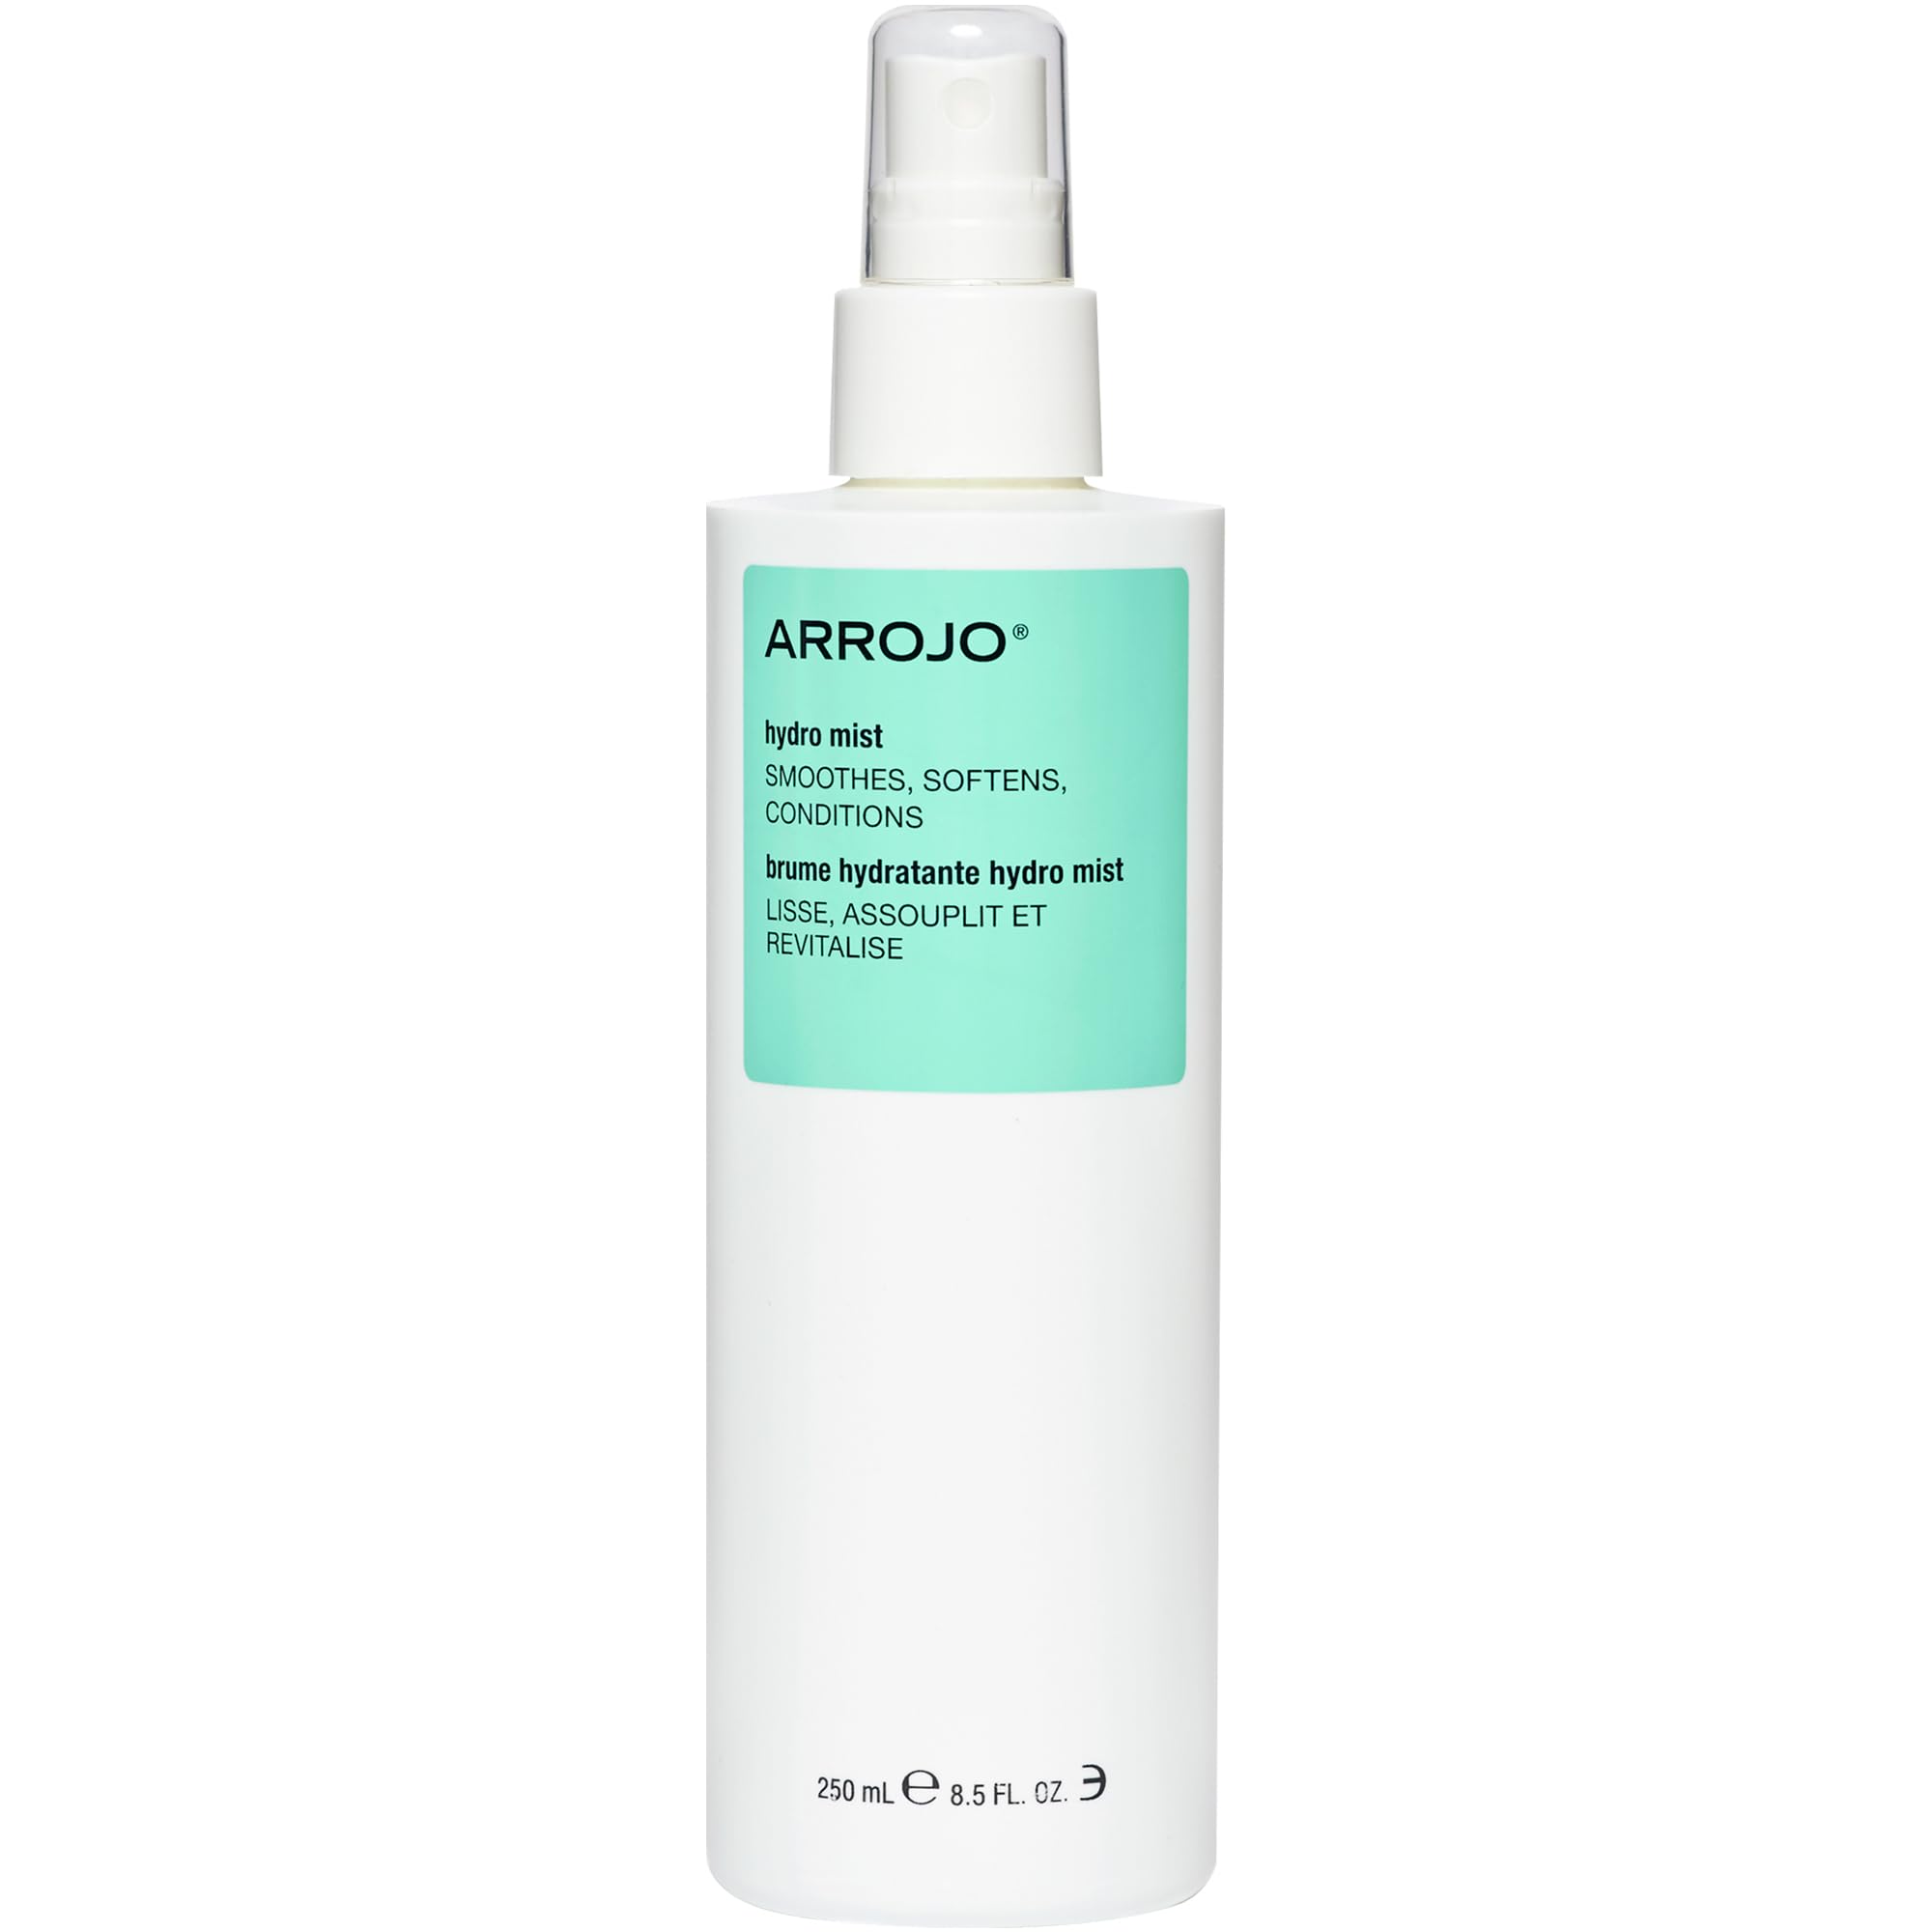 Hair Mist - Nourishing Hair Spray Lotion for Smooth & Hydrated Locks - Conditioning Hair Lotion for Tangle-Free Hairstyling for Any Type - 8.5 oz Detangler Spray - Hydro Mist by Arrojo